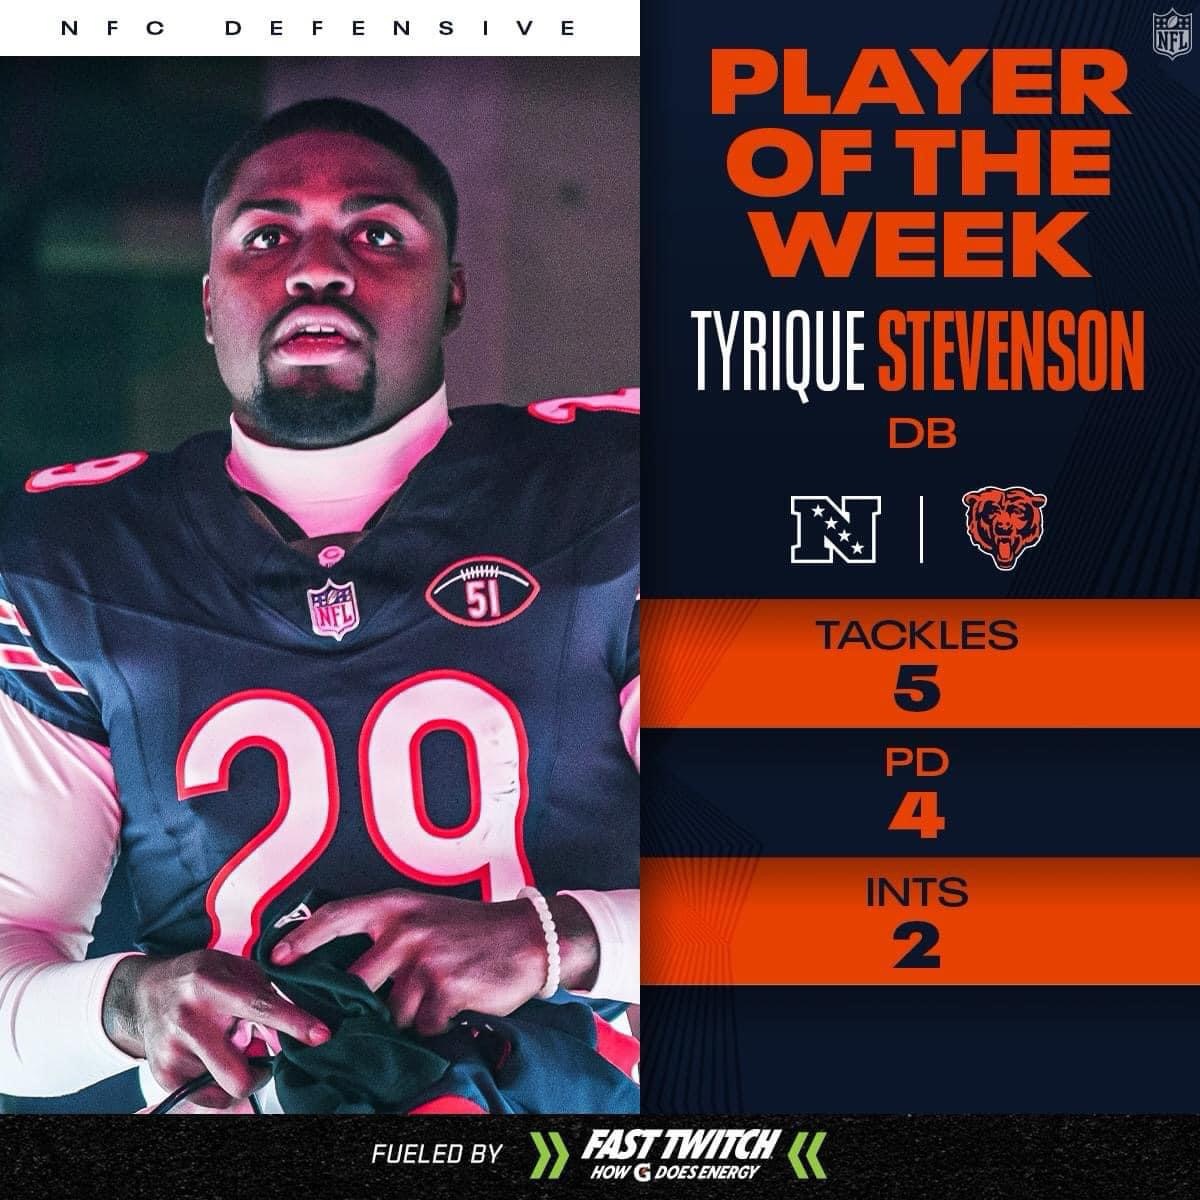 Congratulations to Tyrique Stevenson on being named @NFL Player of the Week! #RidgePride